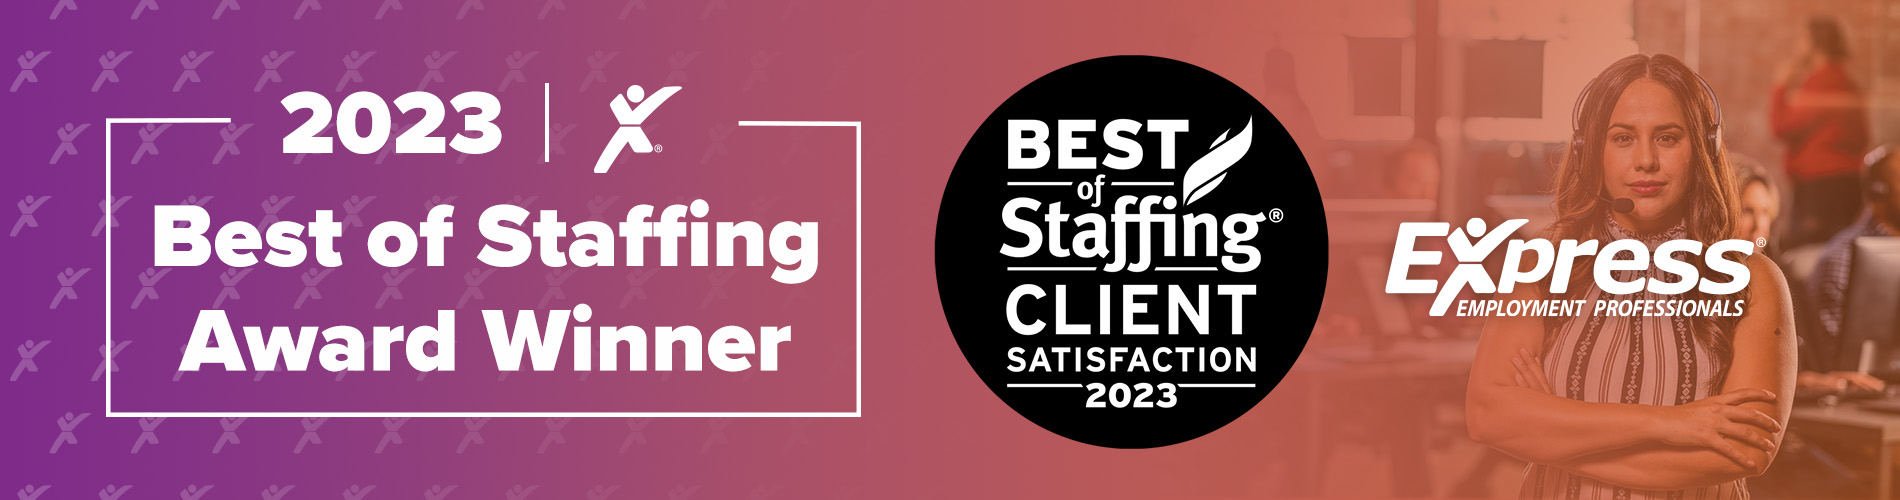 Best of Staffing Home Page Banner Image